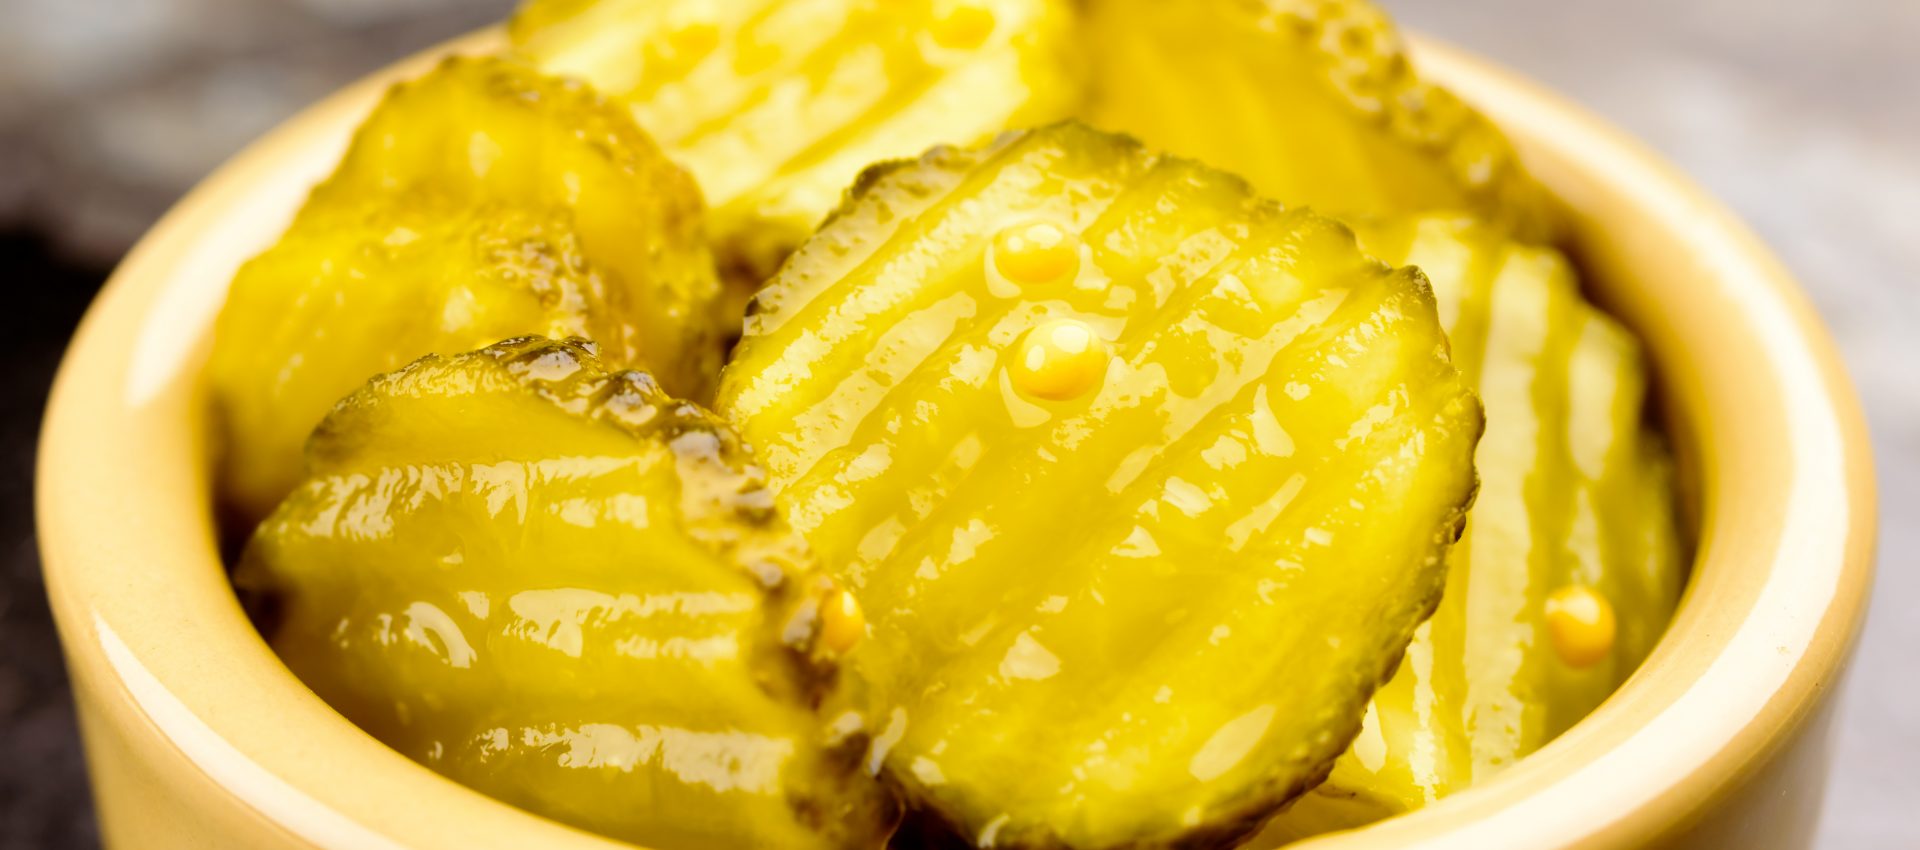 Mrs. Wages® State Fair Zesty Bread & Butter Pickles